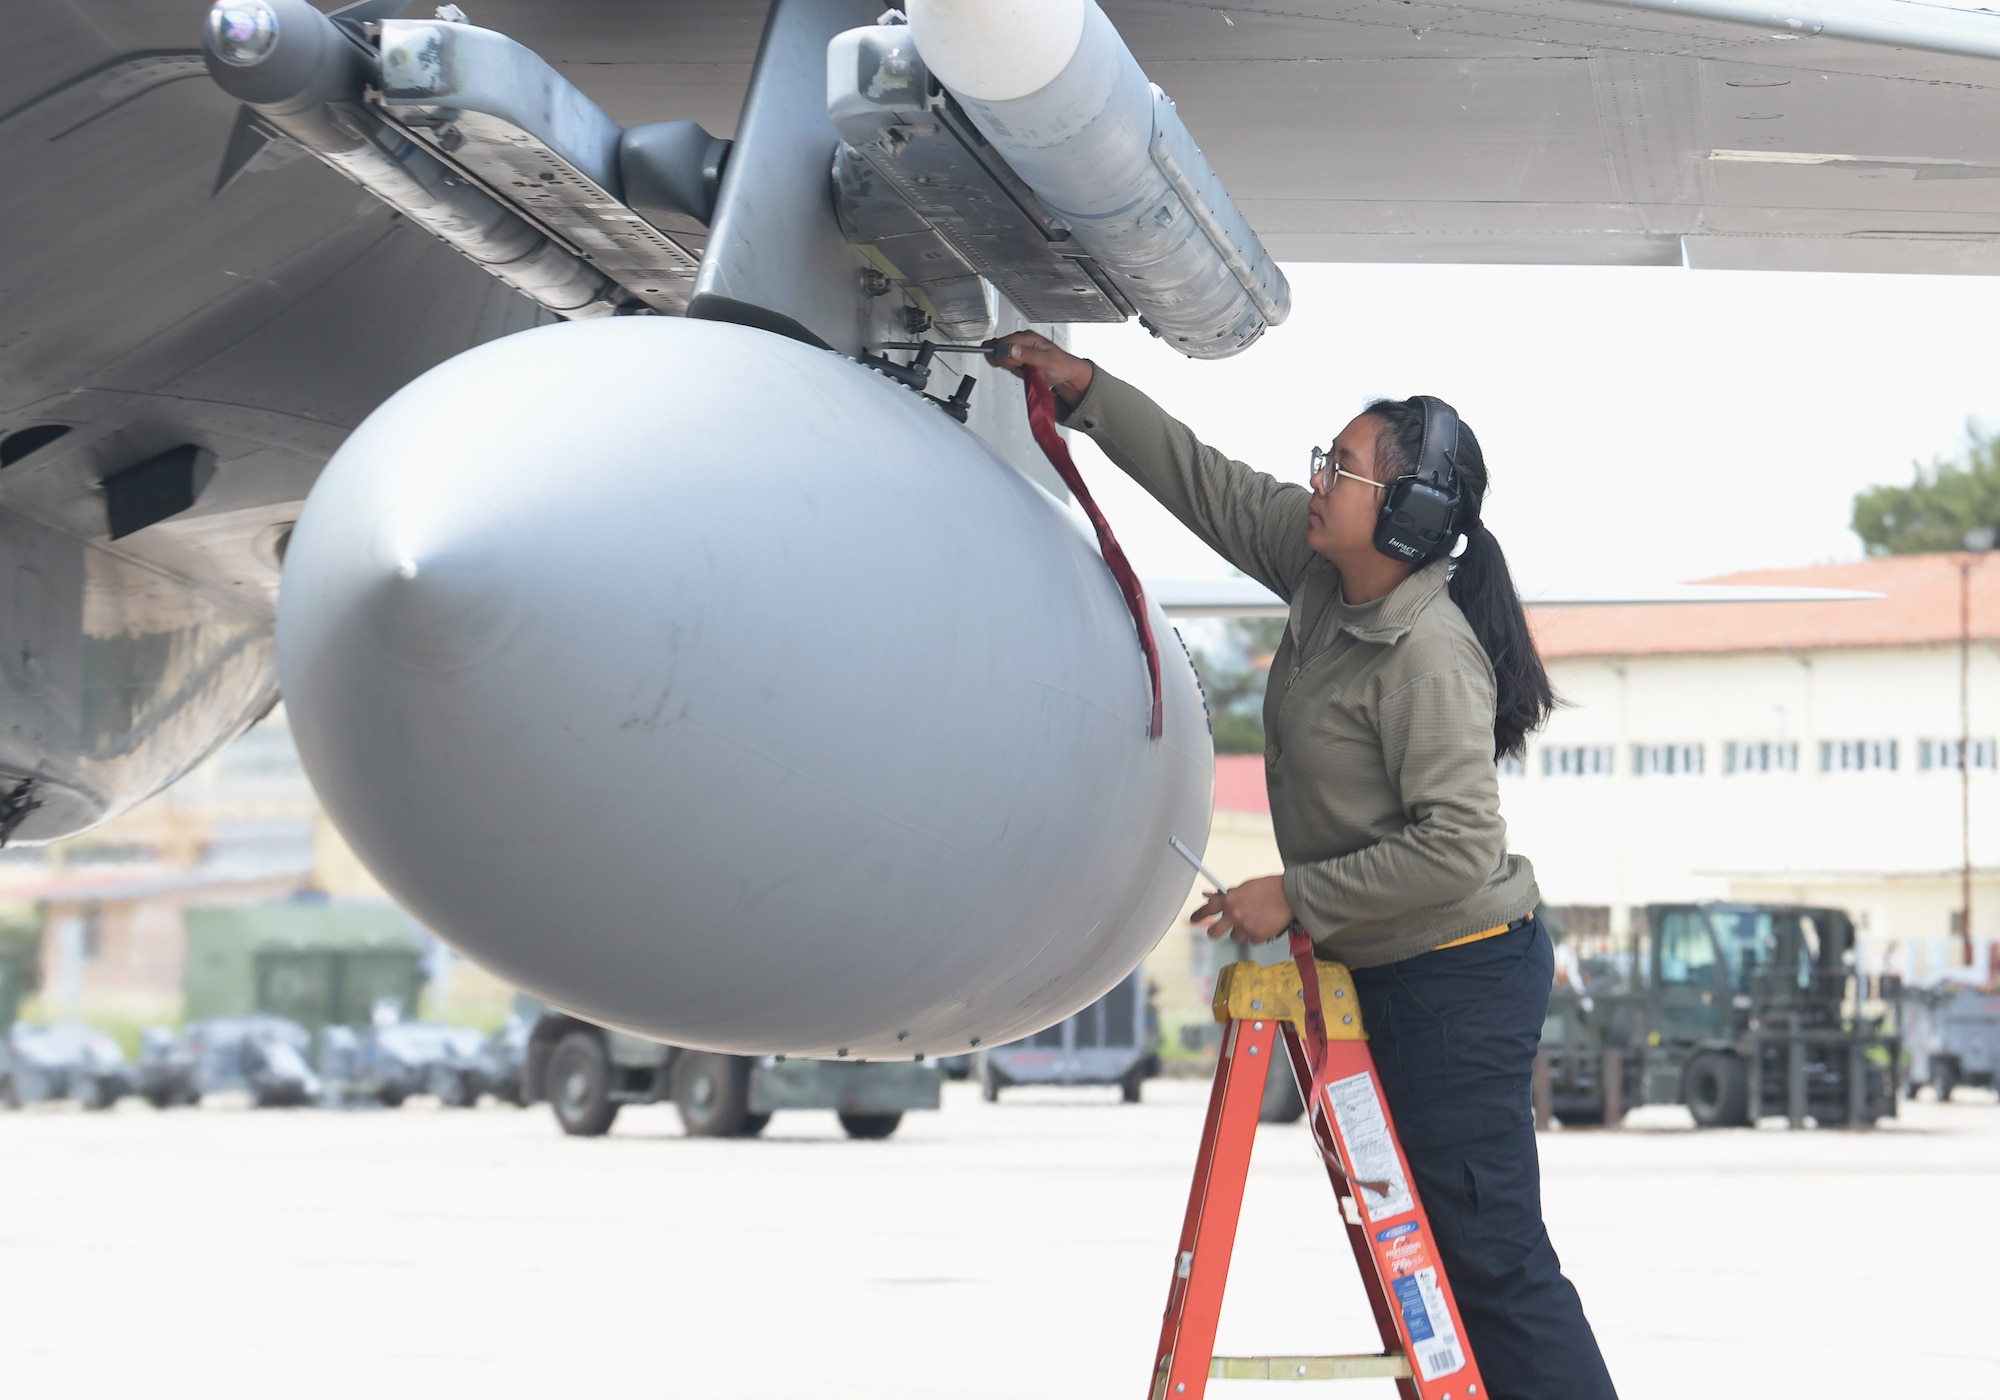 U.S. Air Force Airman 1st Class Amy Phanthavong, 493rd Aircraft Maintenance Squadron weapons load crew member, disarms munitions on an F-15C Eagle assigned to the 493rd Fighter Squadron during exercise Astral Knight 21 at Larissa Air Base, Greece, May 20, 2021. Astral Knight is a multinational, integrated air and missile defense exercise conducted in the Adriatic Region of Europe designed to enhance interoperability between the U.S. and its NATO allies in the region. (U.S. Air Force photo by Tech. Sgt. Alex Fox Echols III)